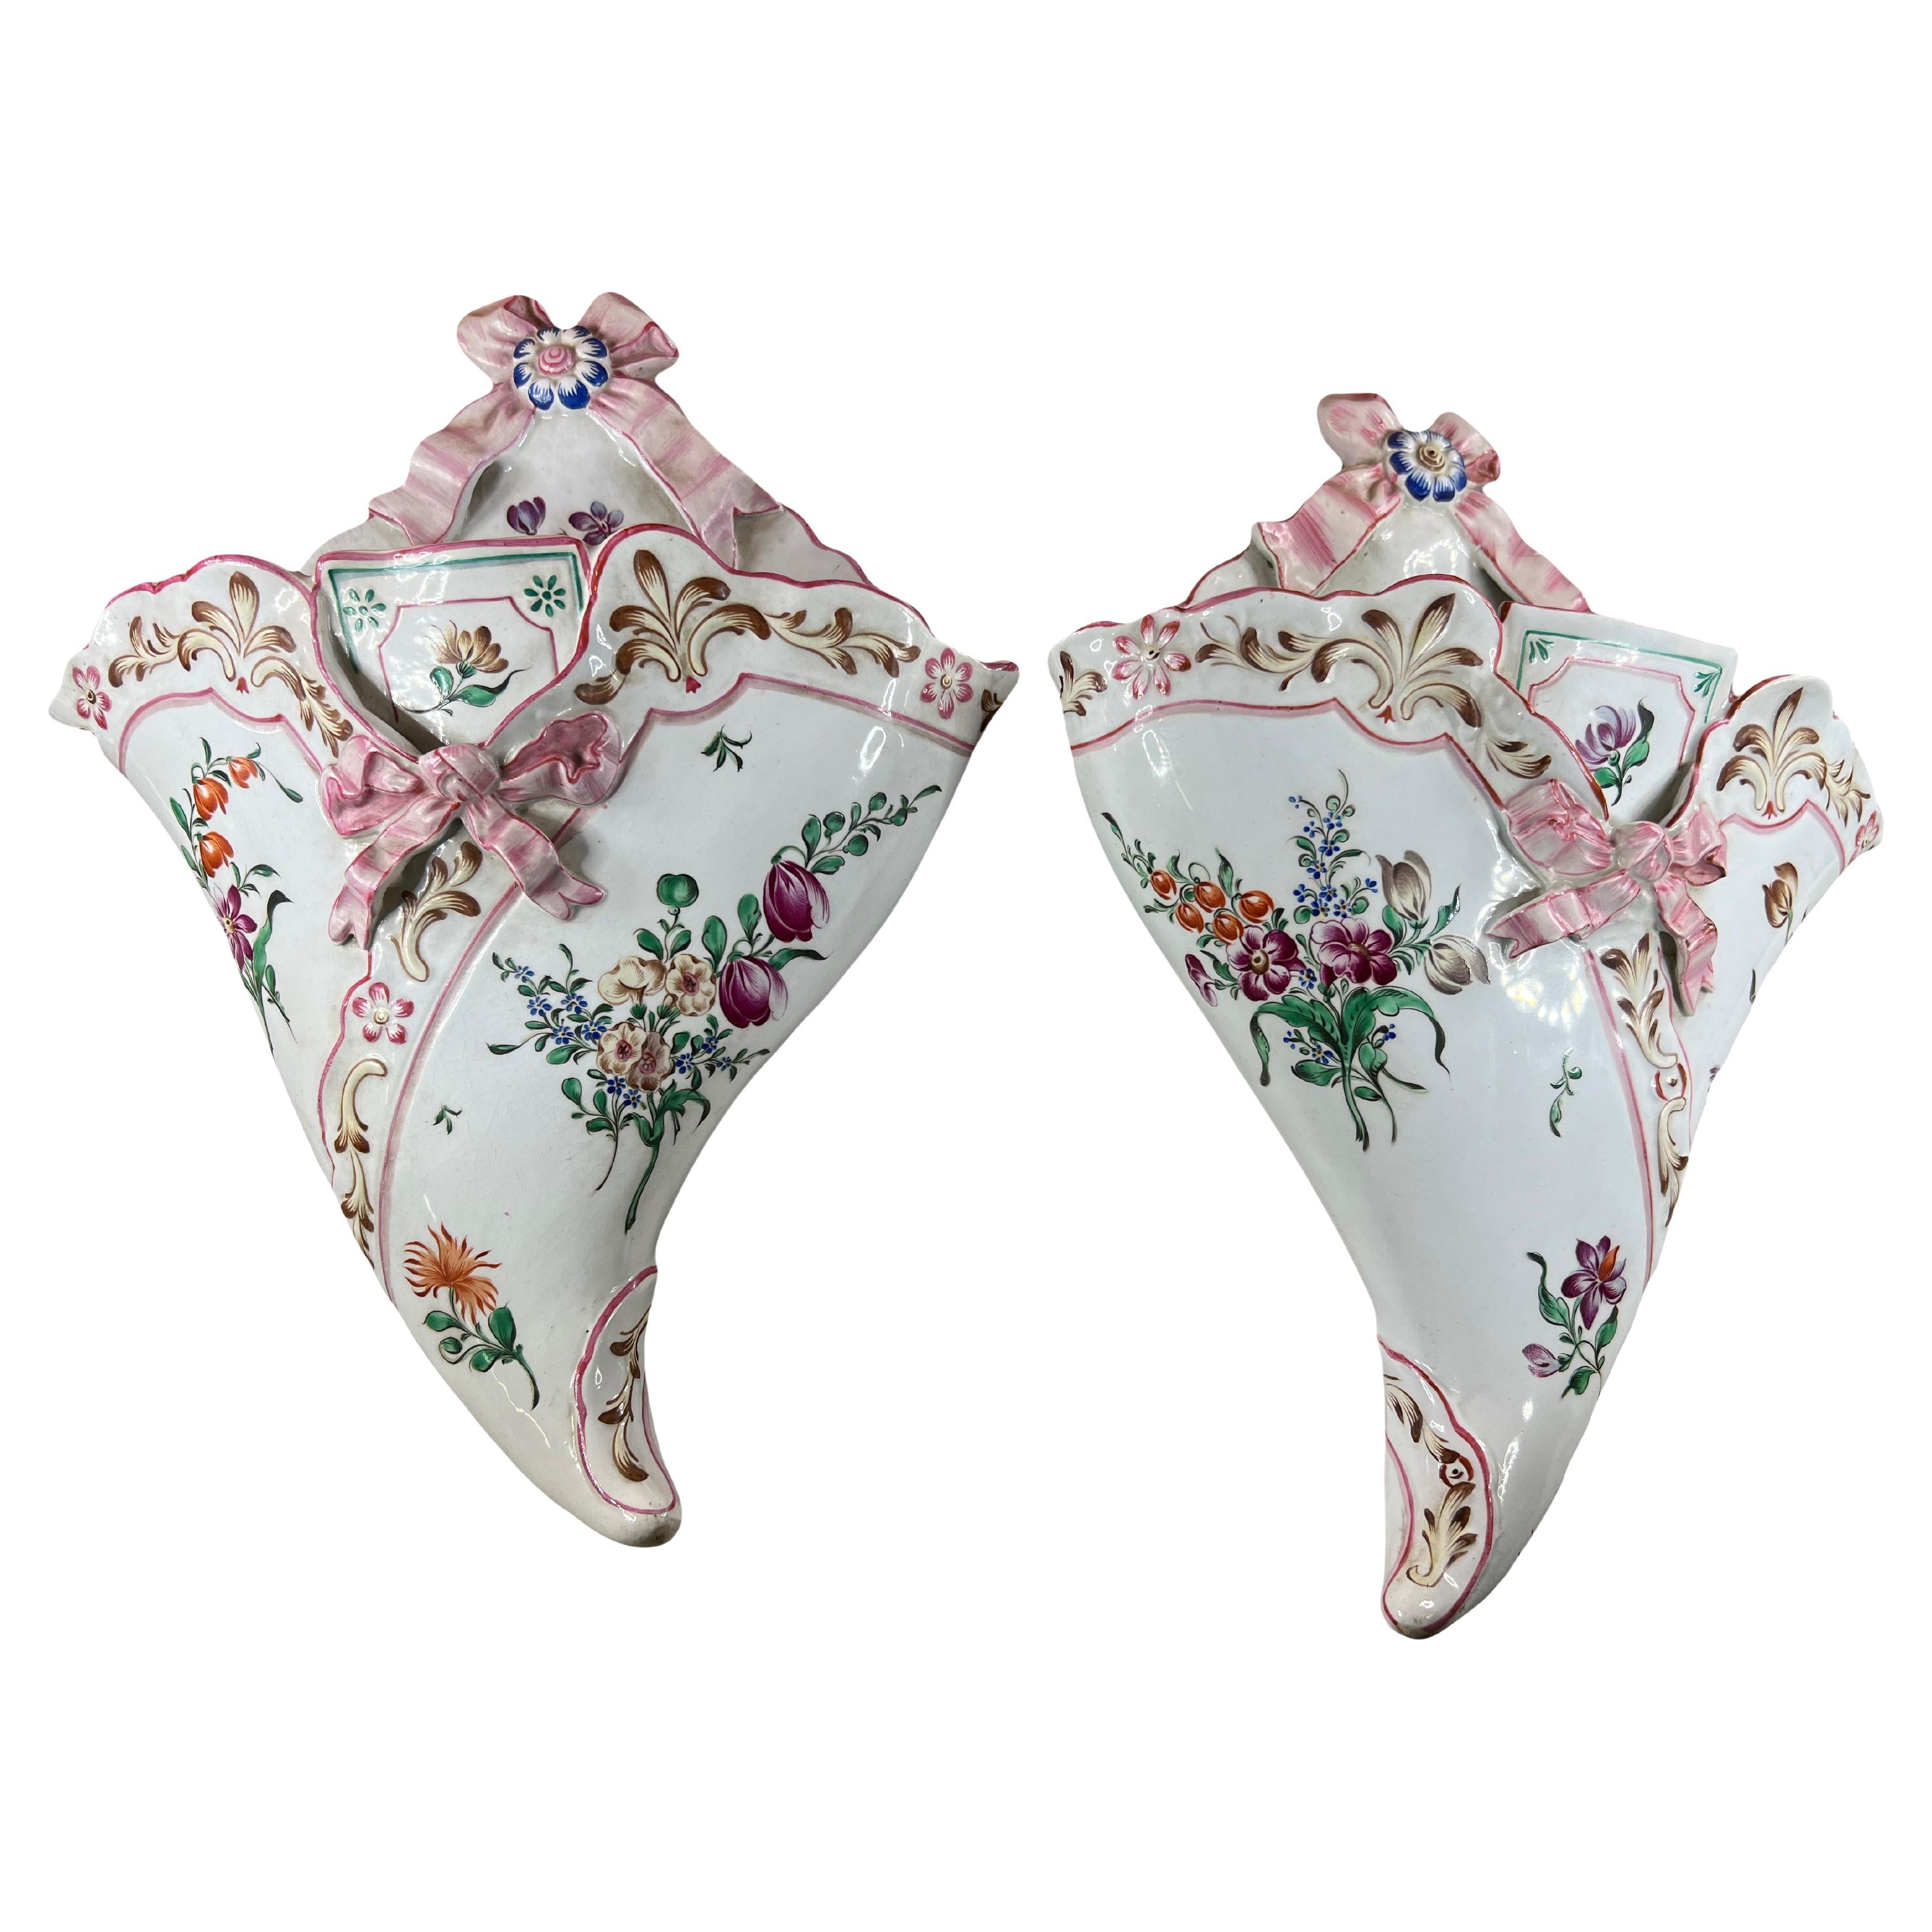 Pair of Luneville Faience Wall Décor Vases from 1900